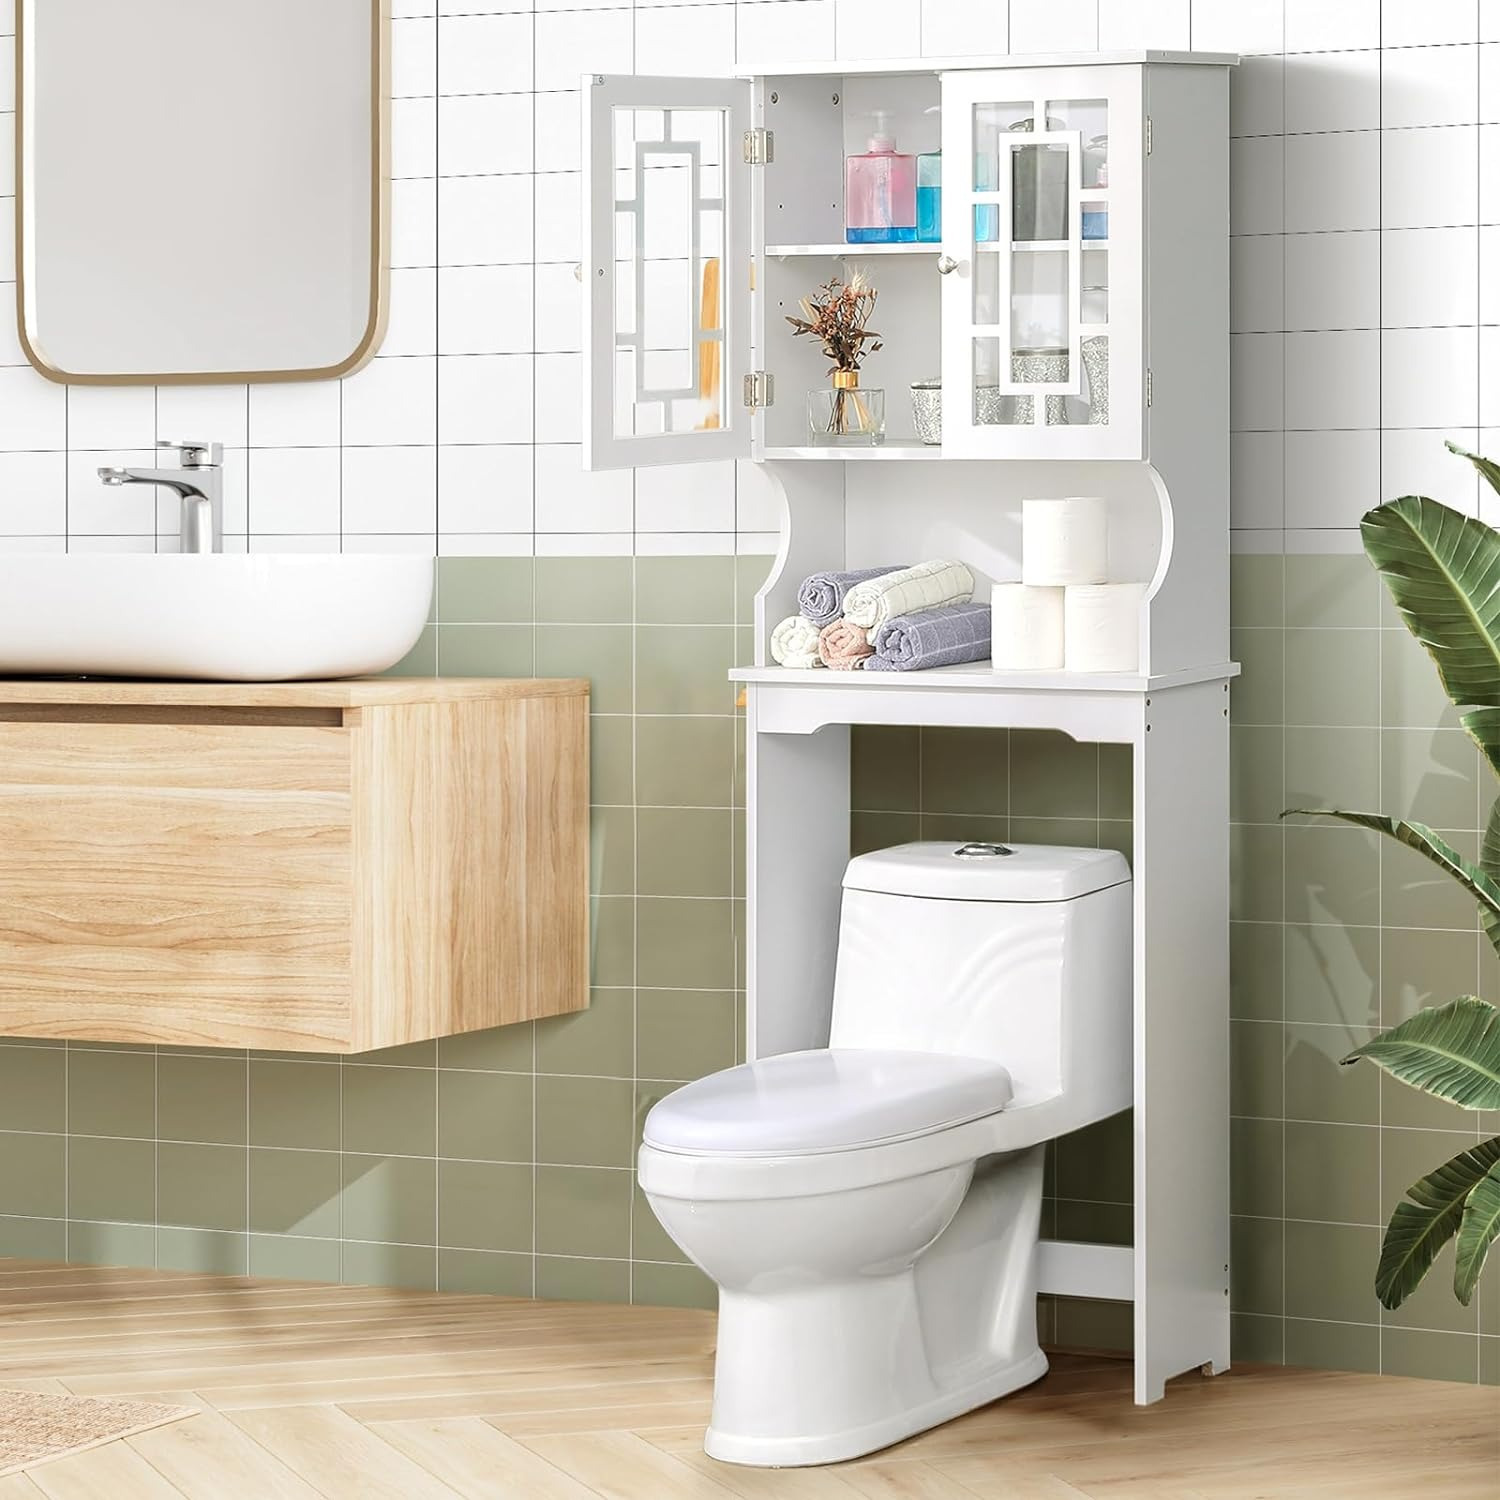 

Over-the-toilet Storage, Wooden Bathroom Organizer, With 2 Glass Doors & Adjustable Shelf, Over Toilet Cabinets For Bathroom, 67.1''l X 23.6''w X 8.5''h